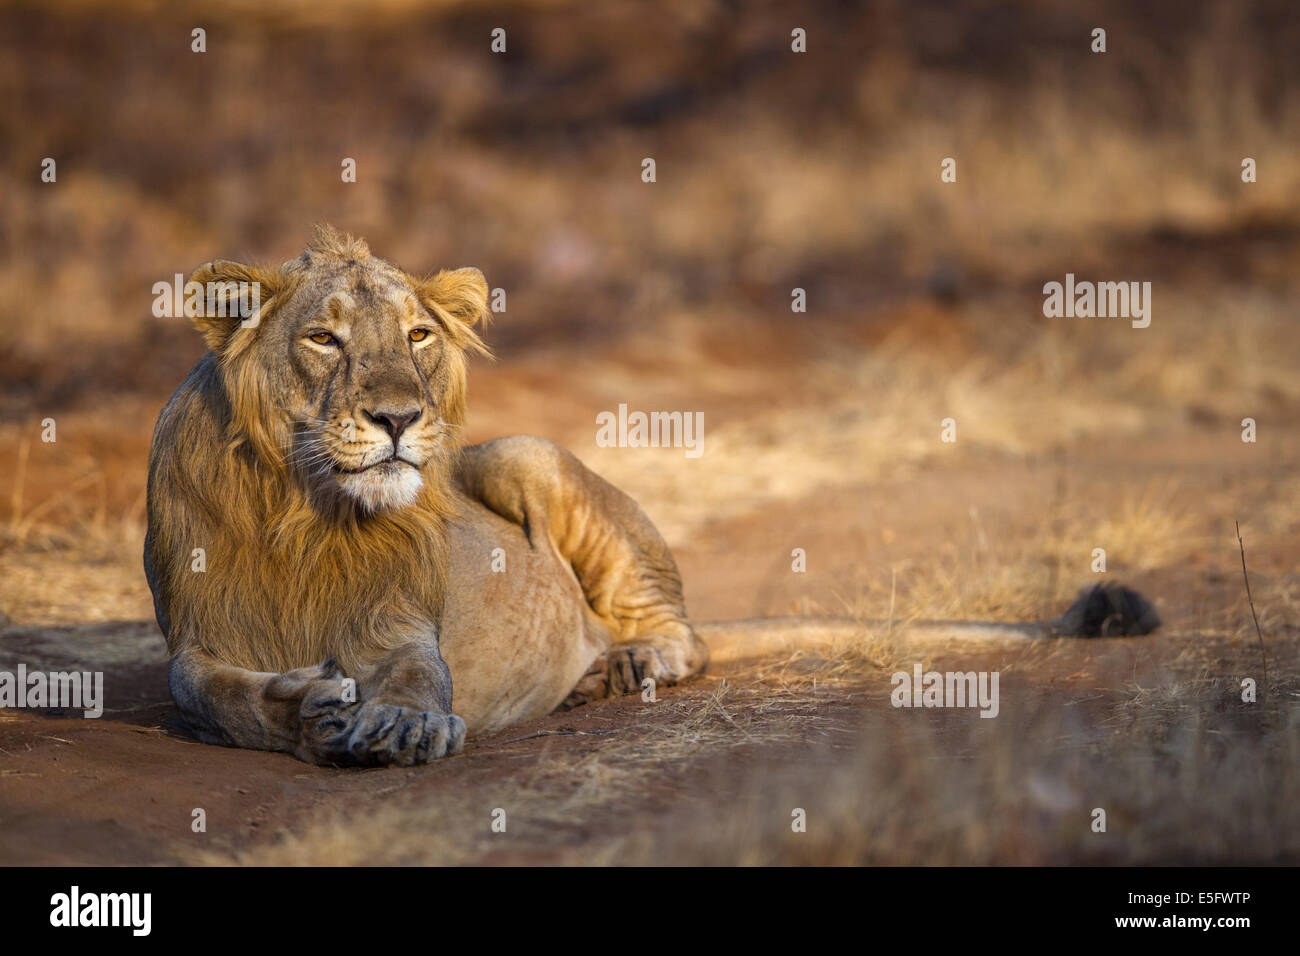 Asiatic Lions (Panthera leo persica) at Gir forest, Gujarat India. Stock Photo